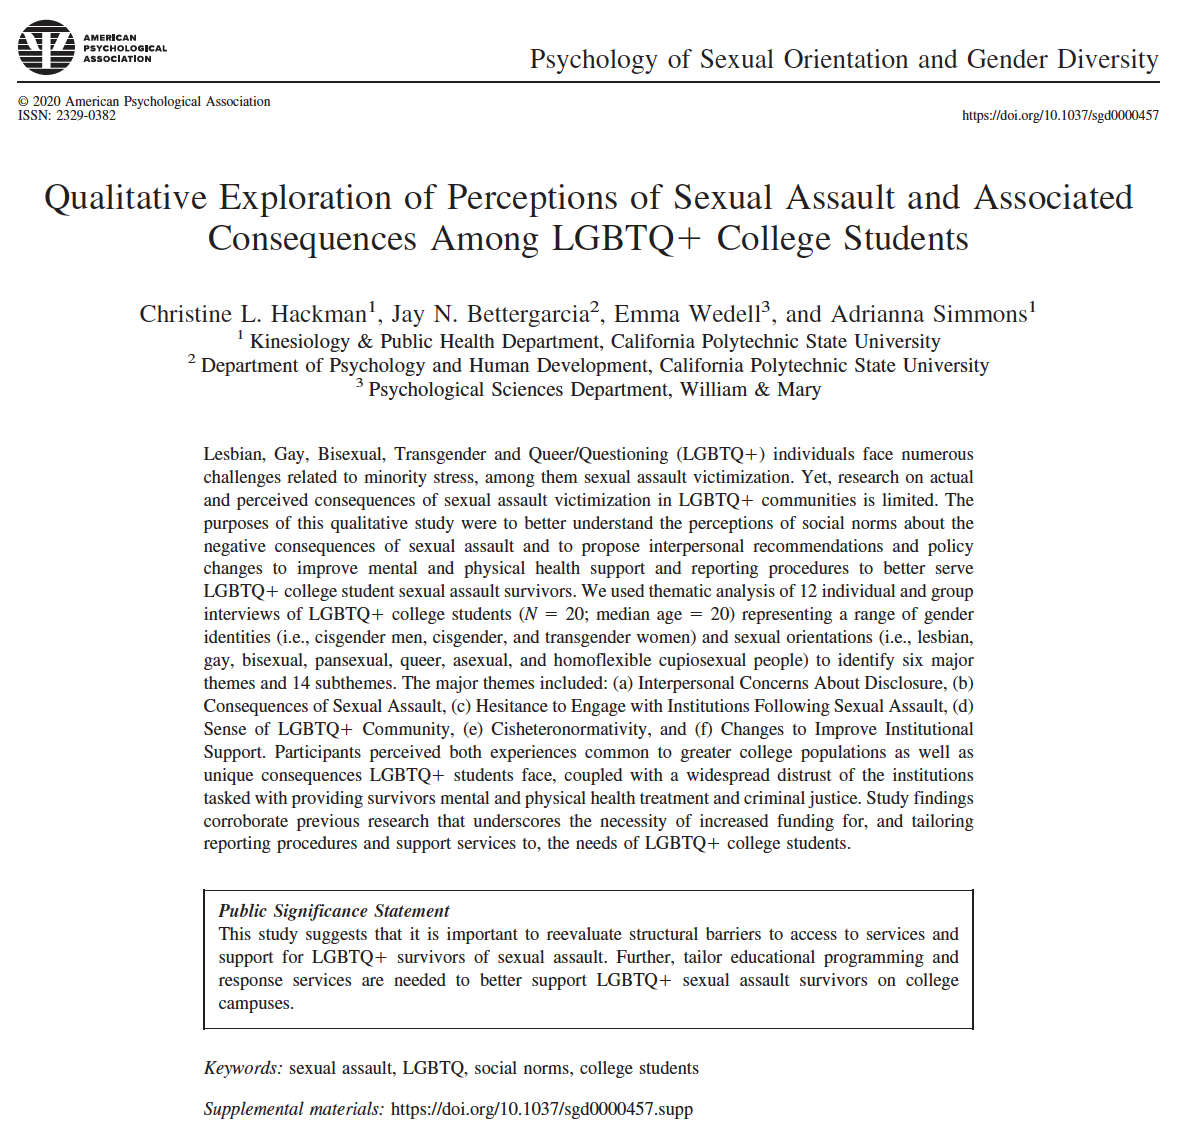 Qualitative Exploration of Perceptions of Sexual Assault and Associated Consequences Among LGBTQ+ College Students